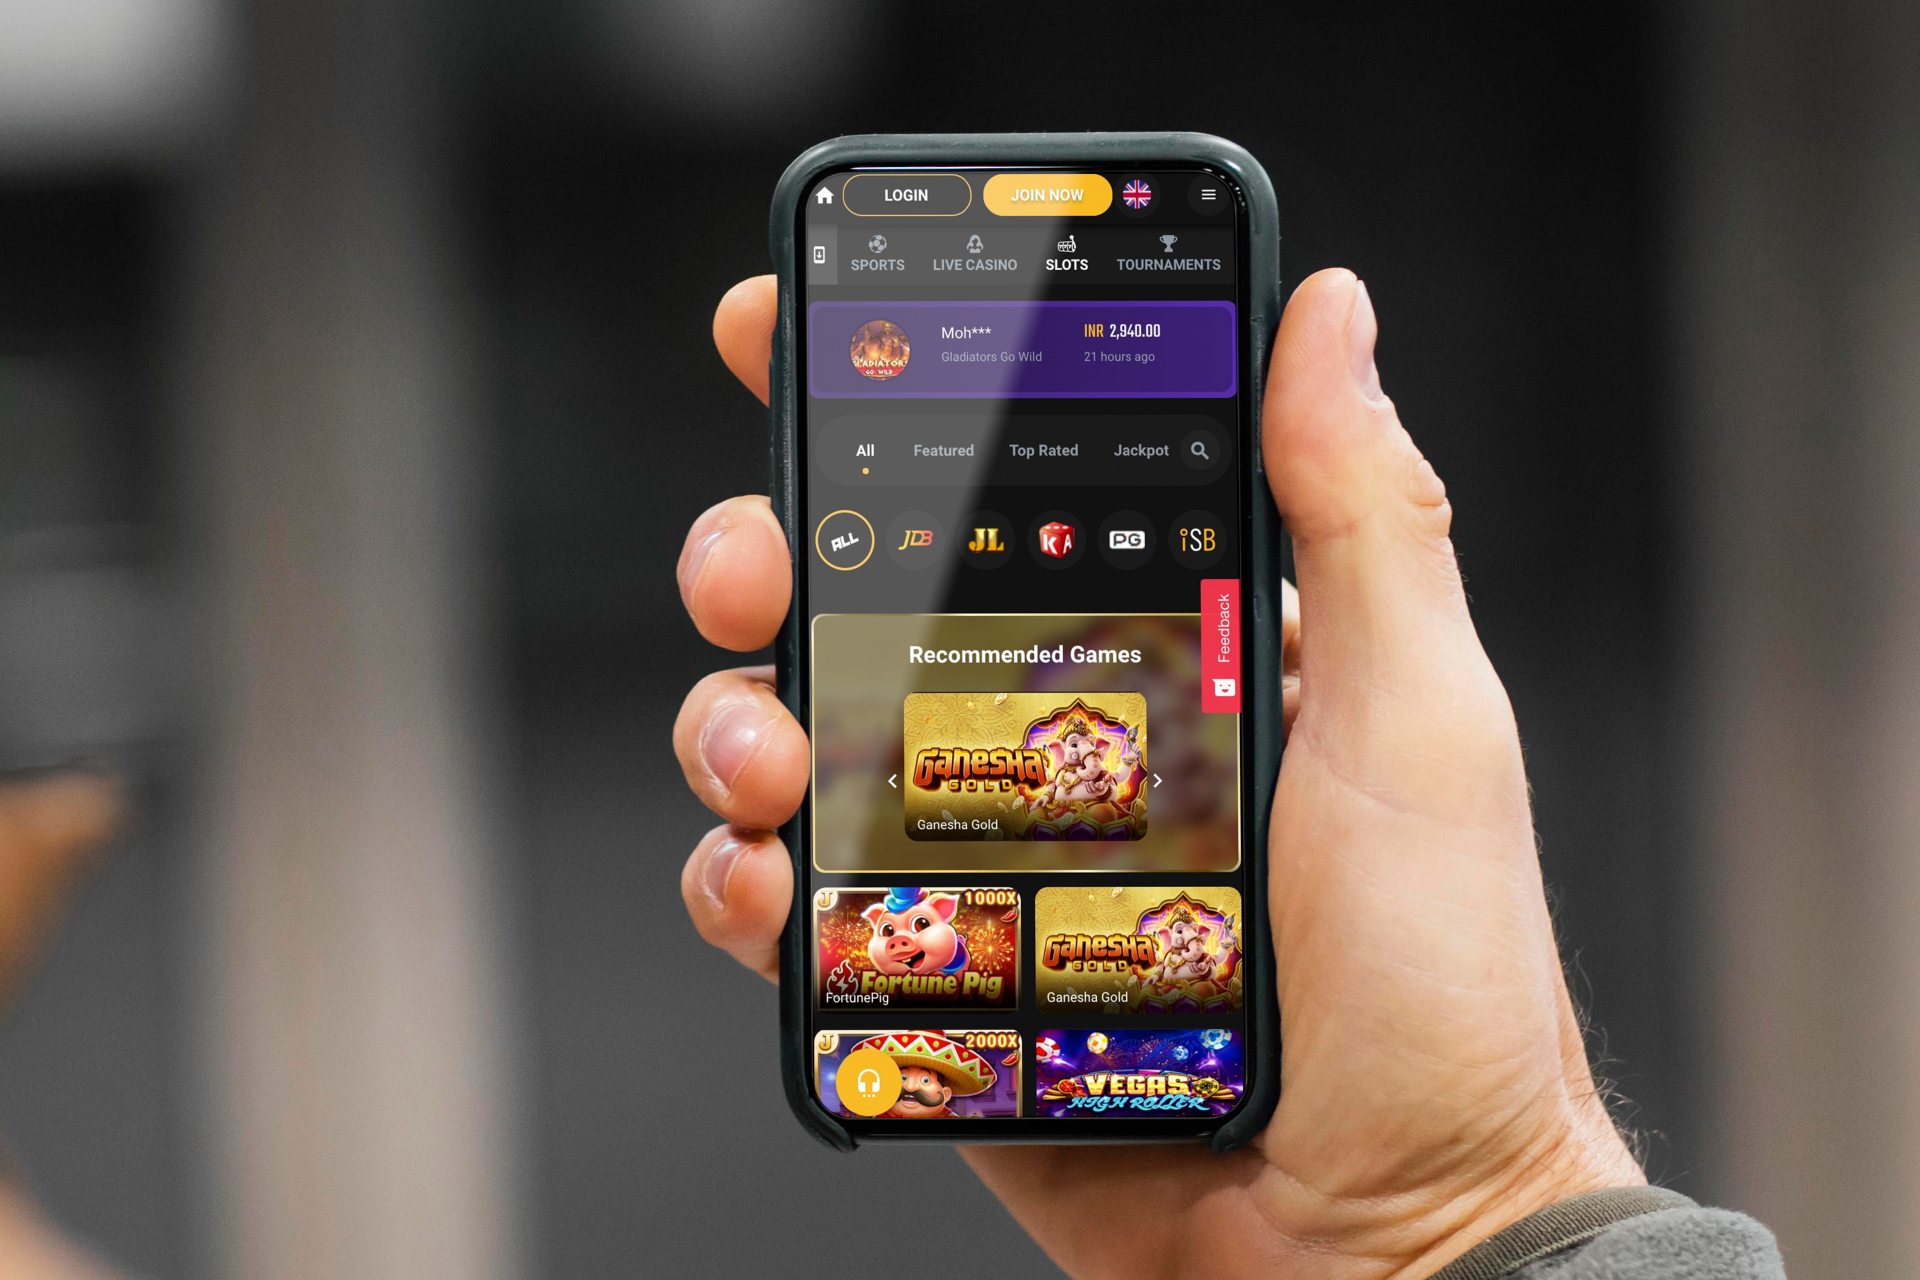 There are around 100 slots at Jeetwin casino.